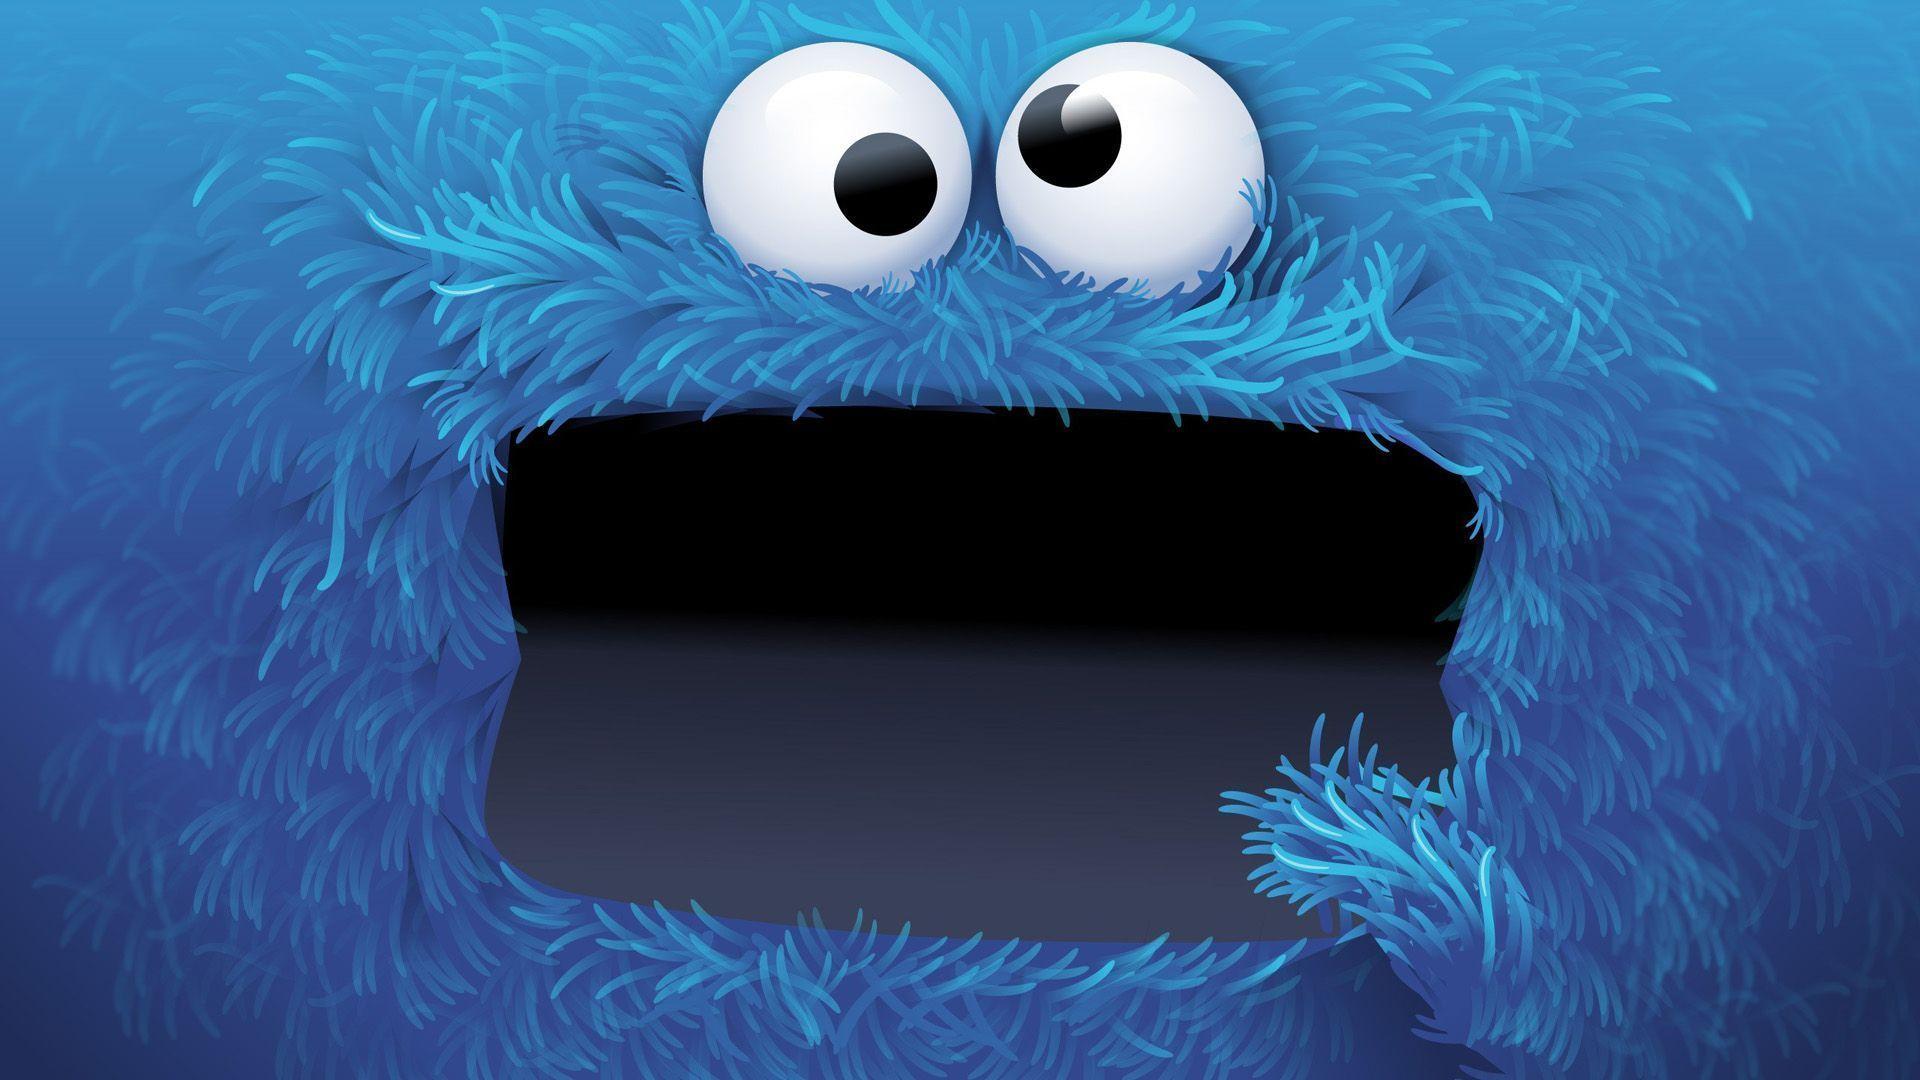 Wallpaper For > Cookie Monster Wallpaper Quotes